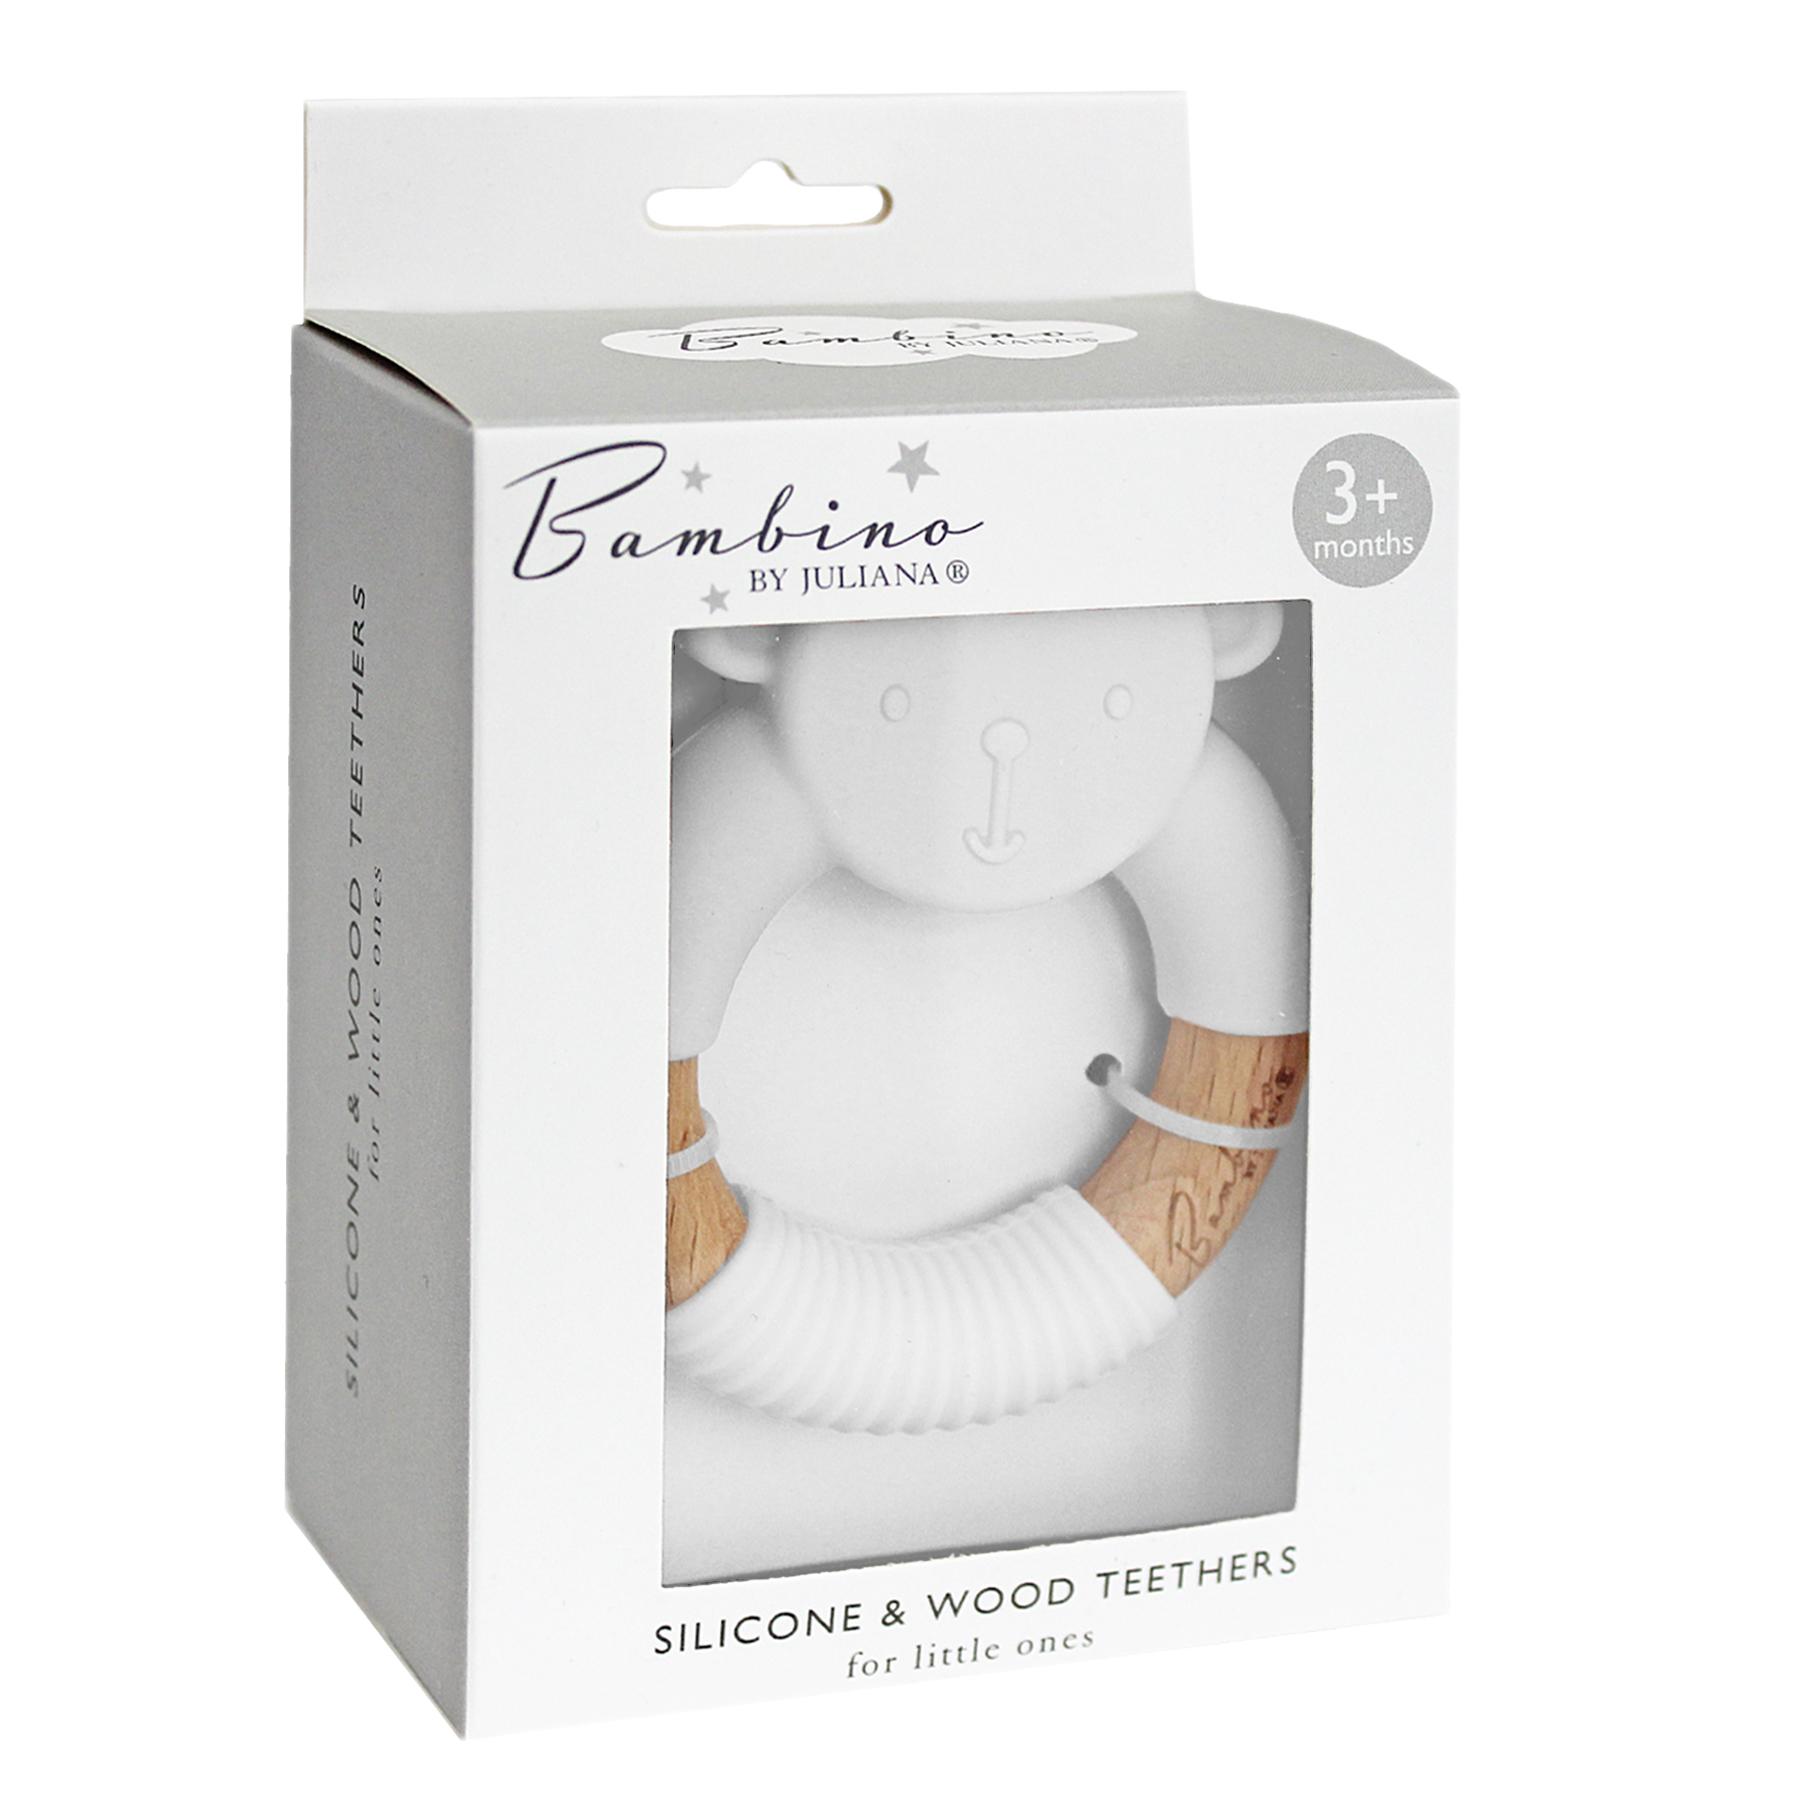 Bambino by Juliana® Round White Silicone Teddy & Wood Teether Boxed